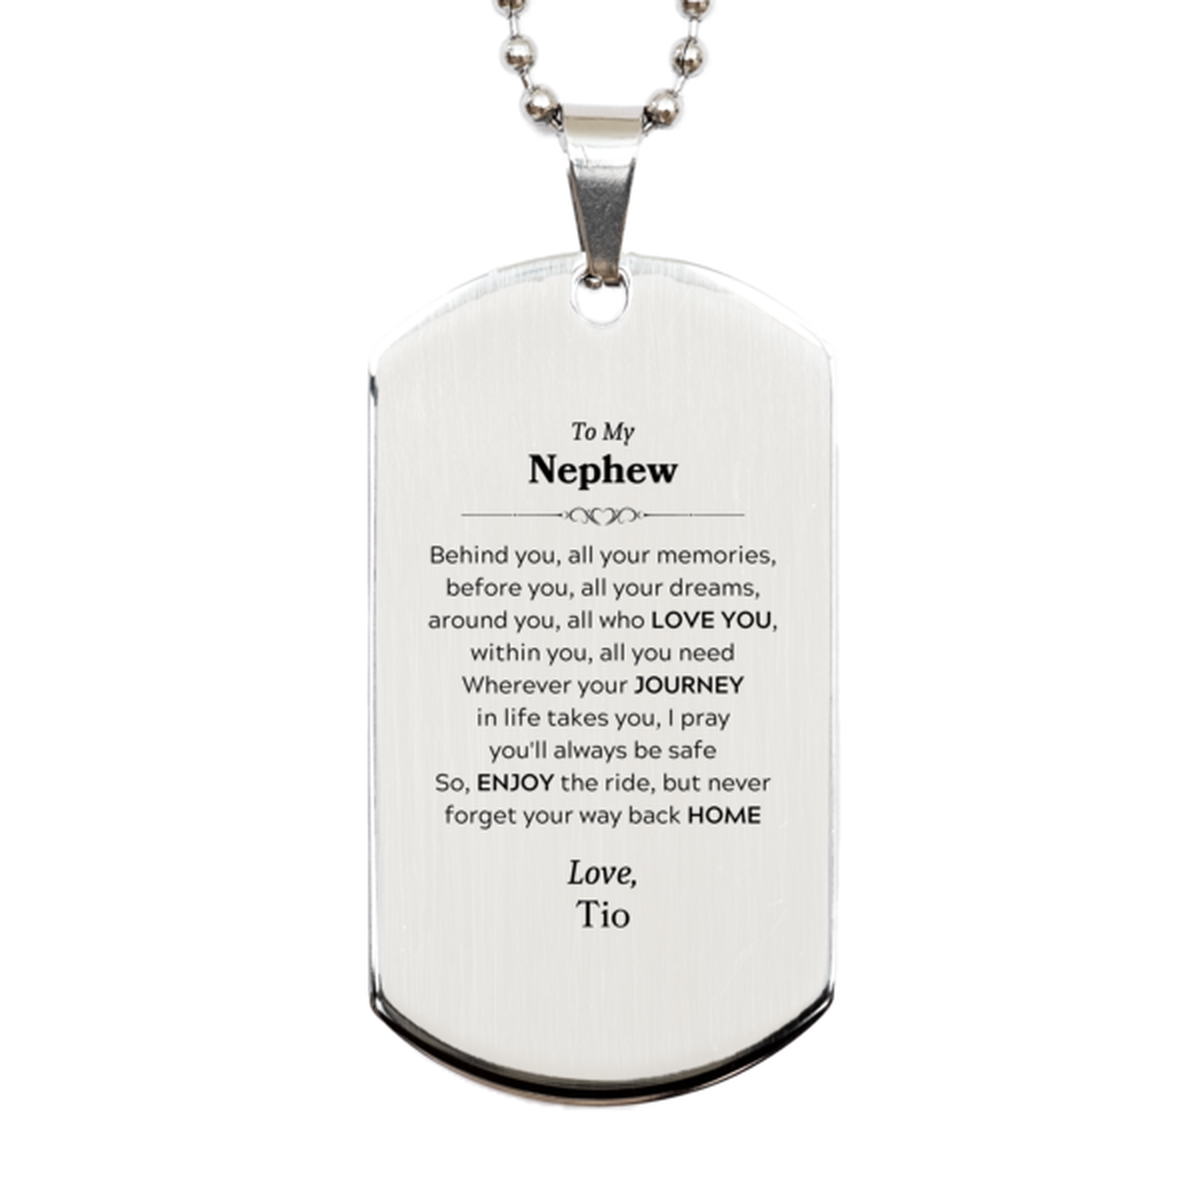 To My Nephew Graduation Gifts from Tio, Nephew Silver Dog Tag Christmas Birthday Gifts for Nephew Behind you, all your memories, before you, all your dreams. Love, Tio